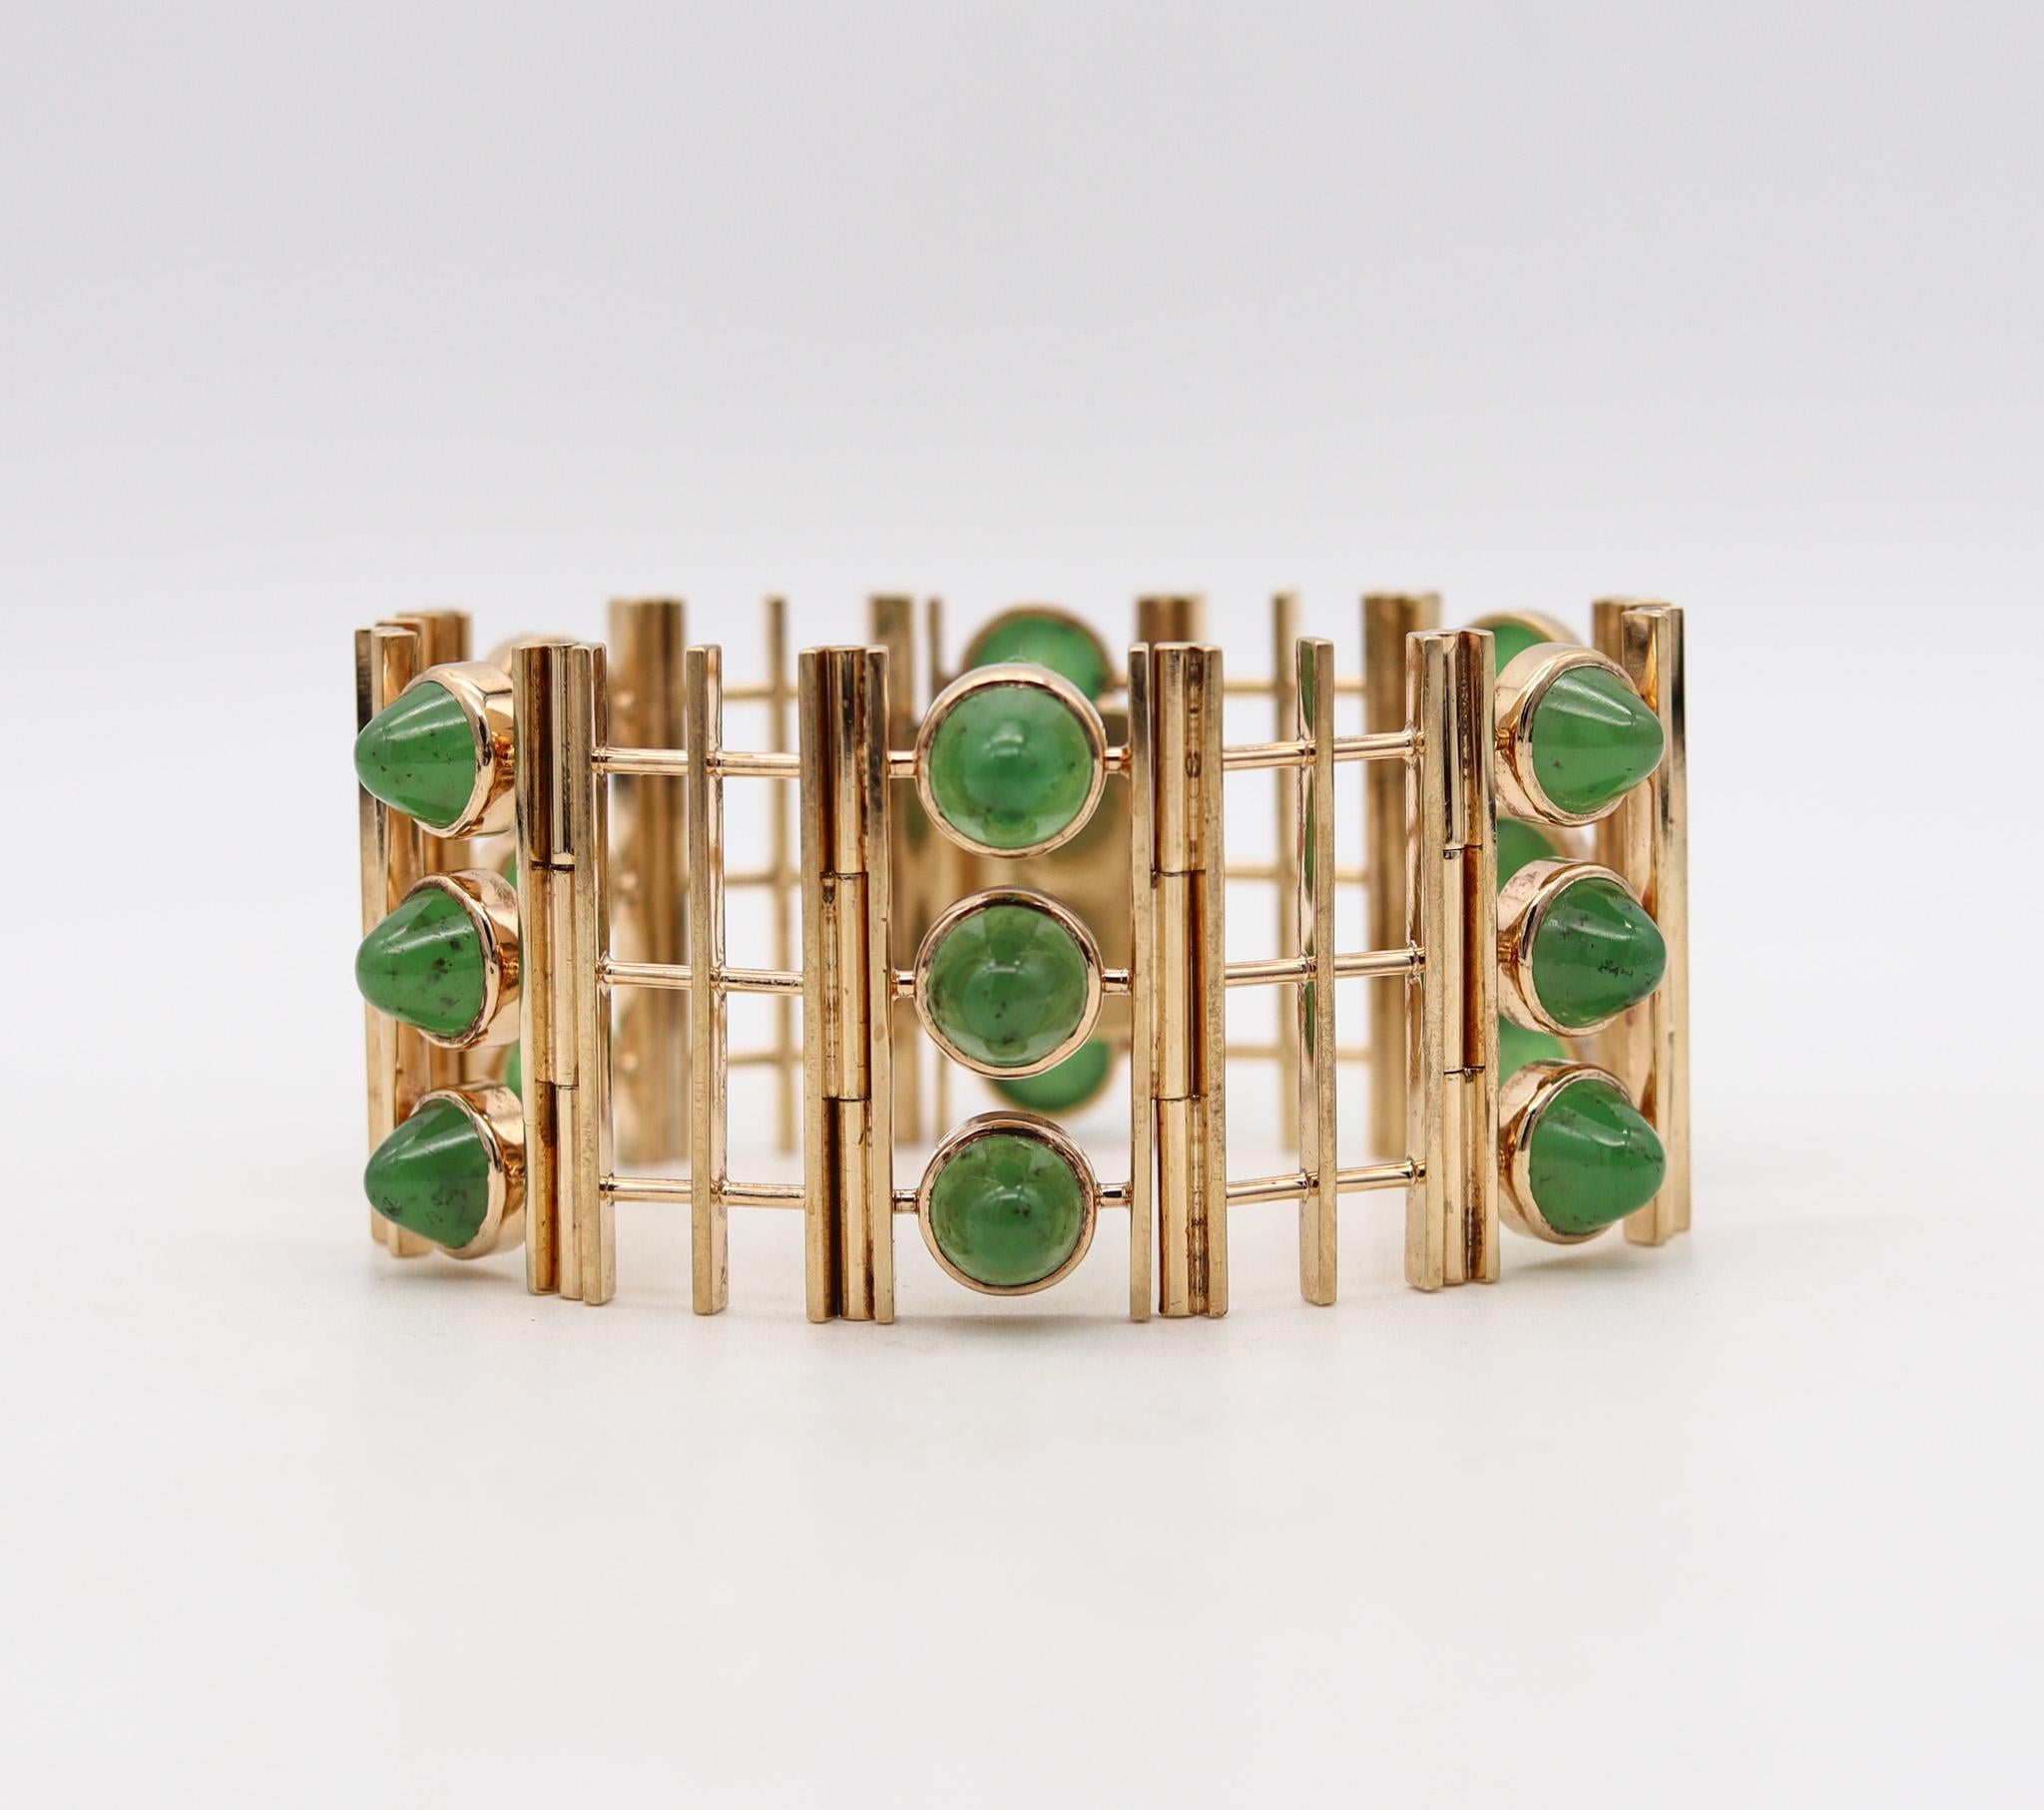 Geometric modernist bracelet made in England.

Amazing geometric and modernist bracelet, created in England by an enigmatic designer to us, with initials WW. It was realized with architectural patterns, during the post war period, back in the 1950.